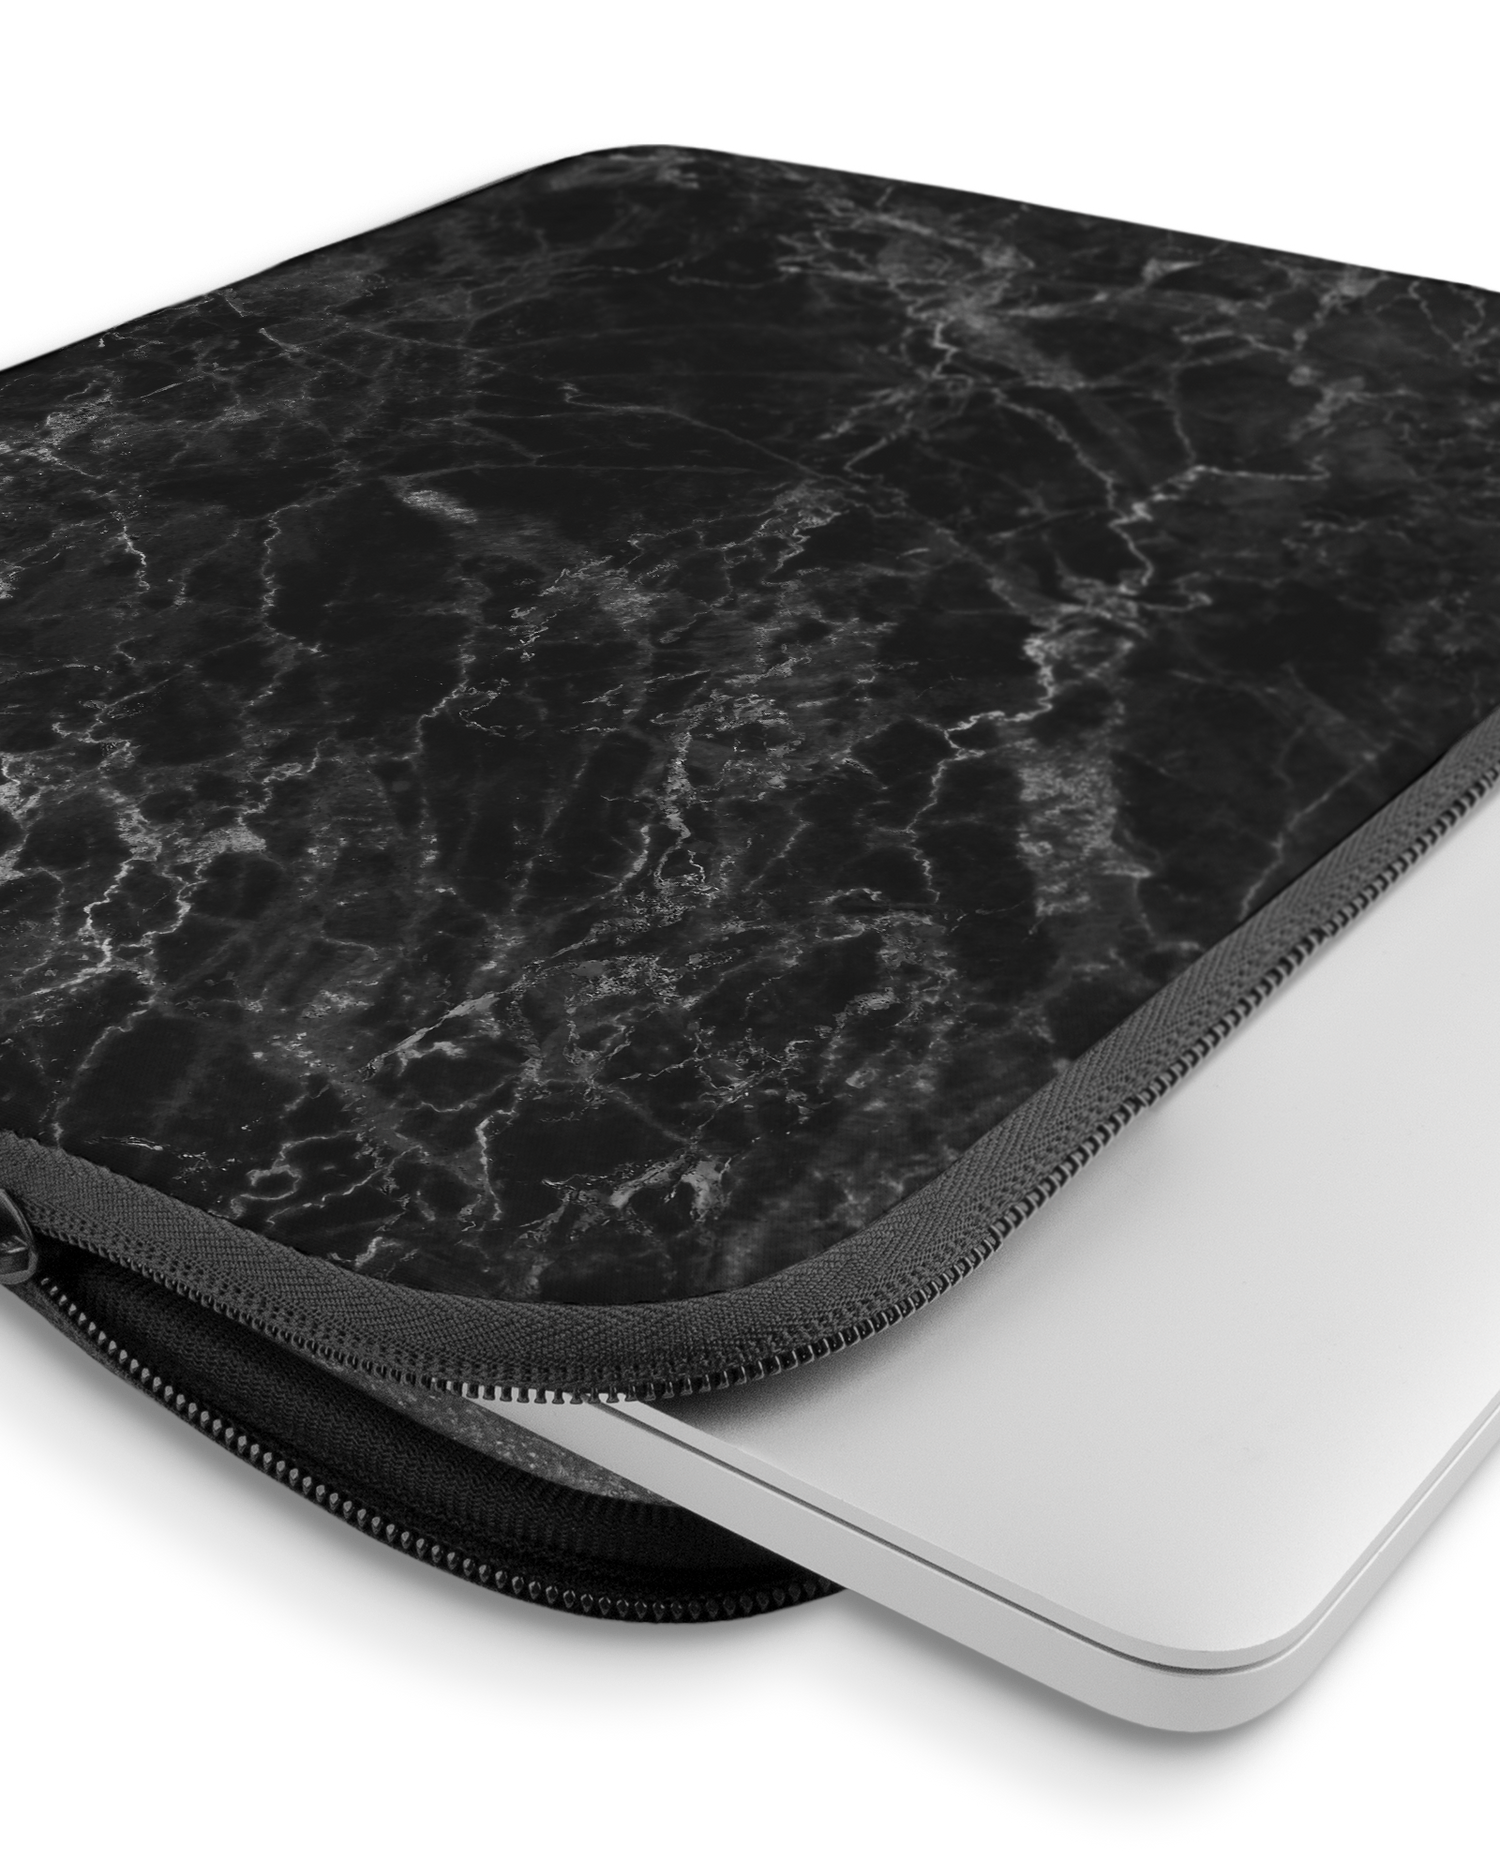 Midnight Marble Laptop Case 15 inch with device inside